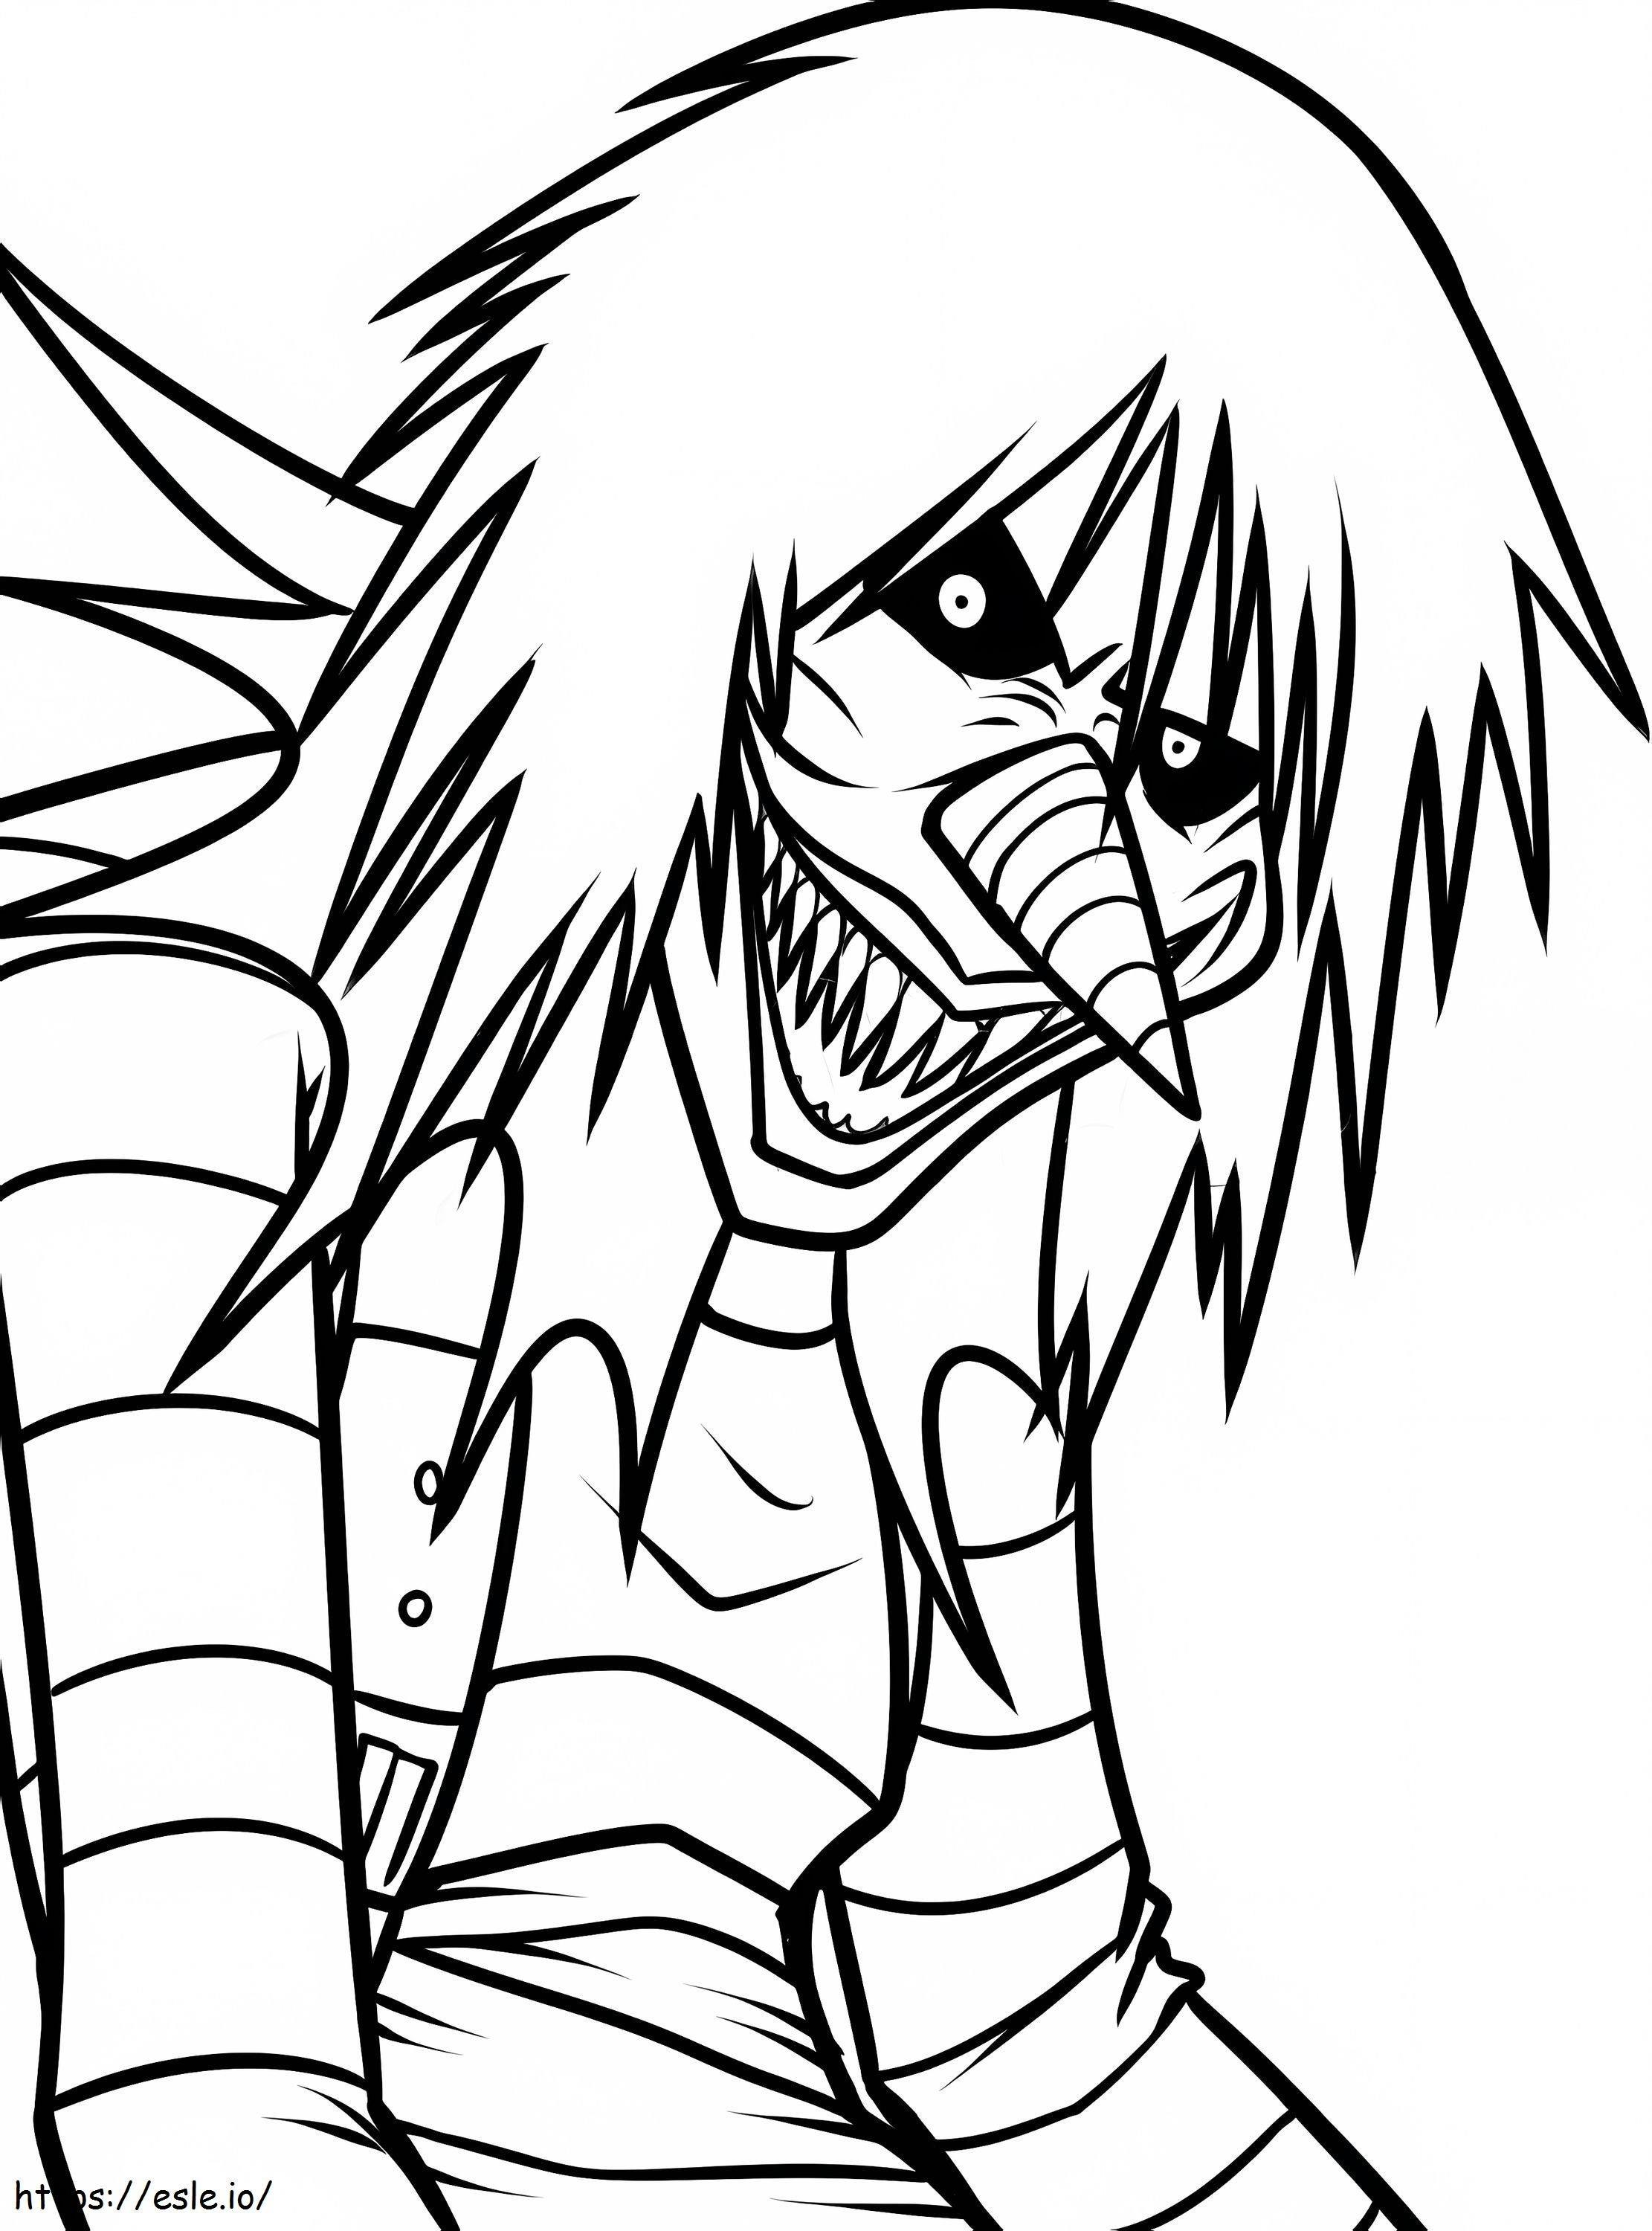 6Jack Laughing coloring page